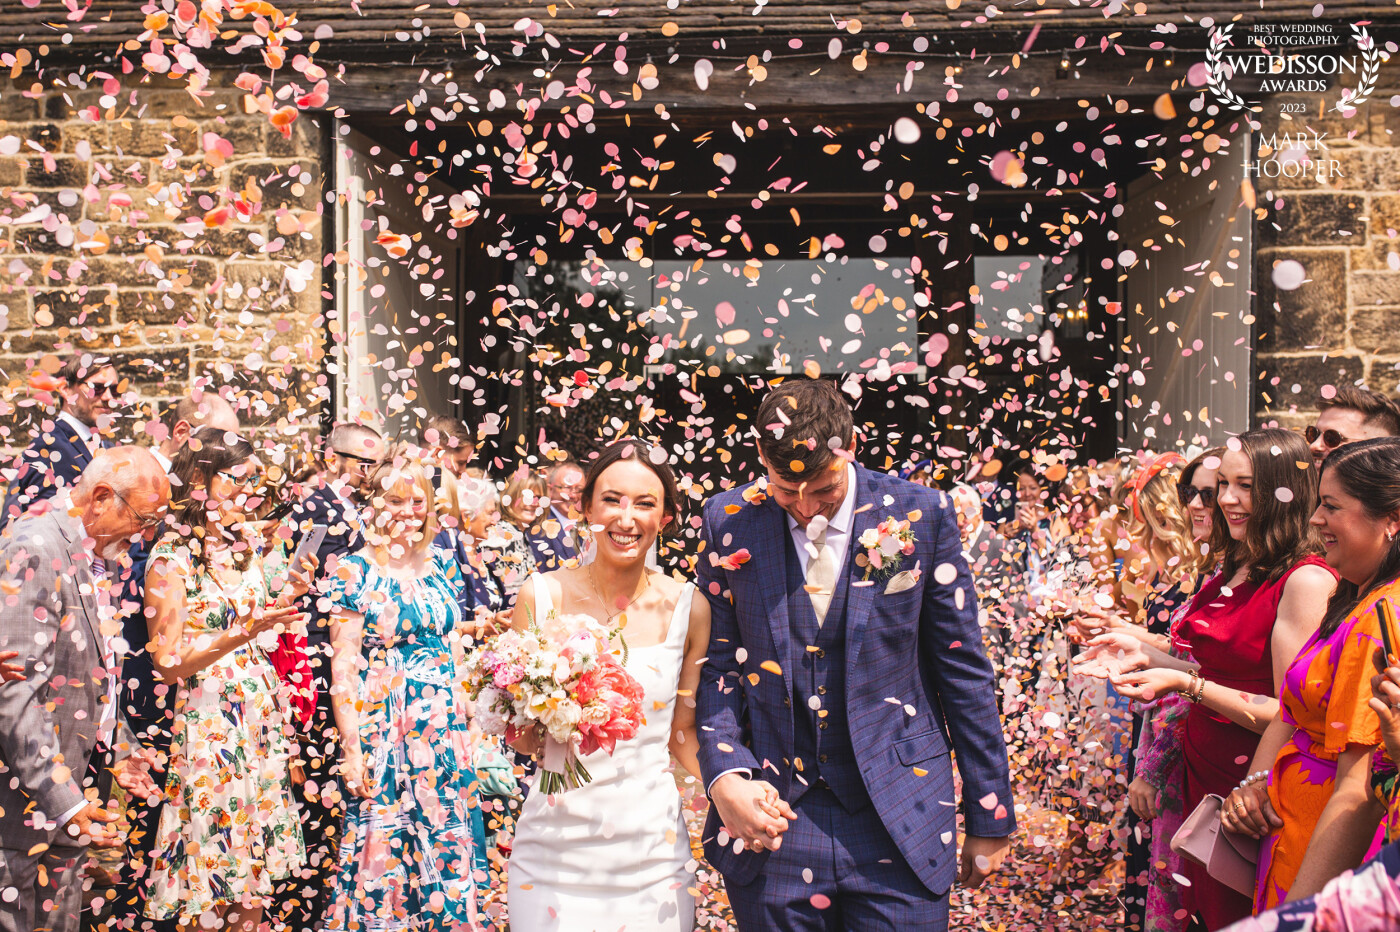 An amazing confetti moment at a beautiful Yorkshire wedding!